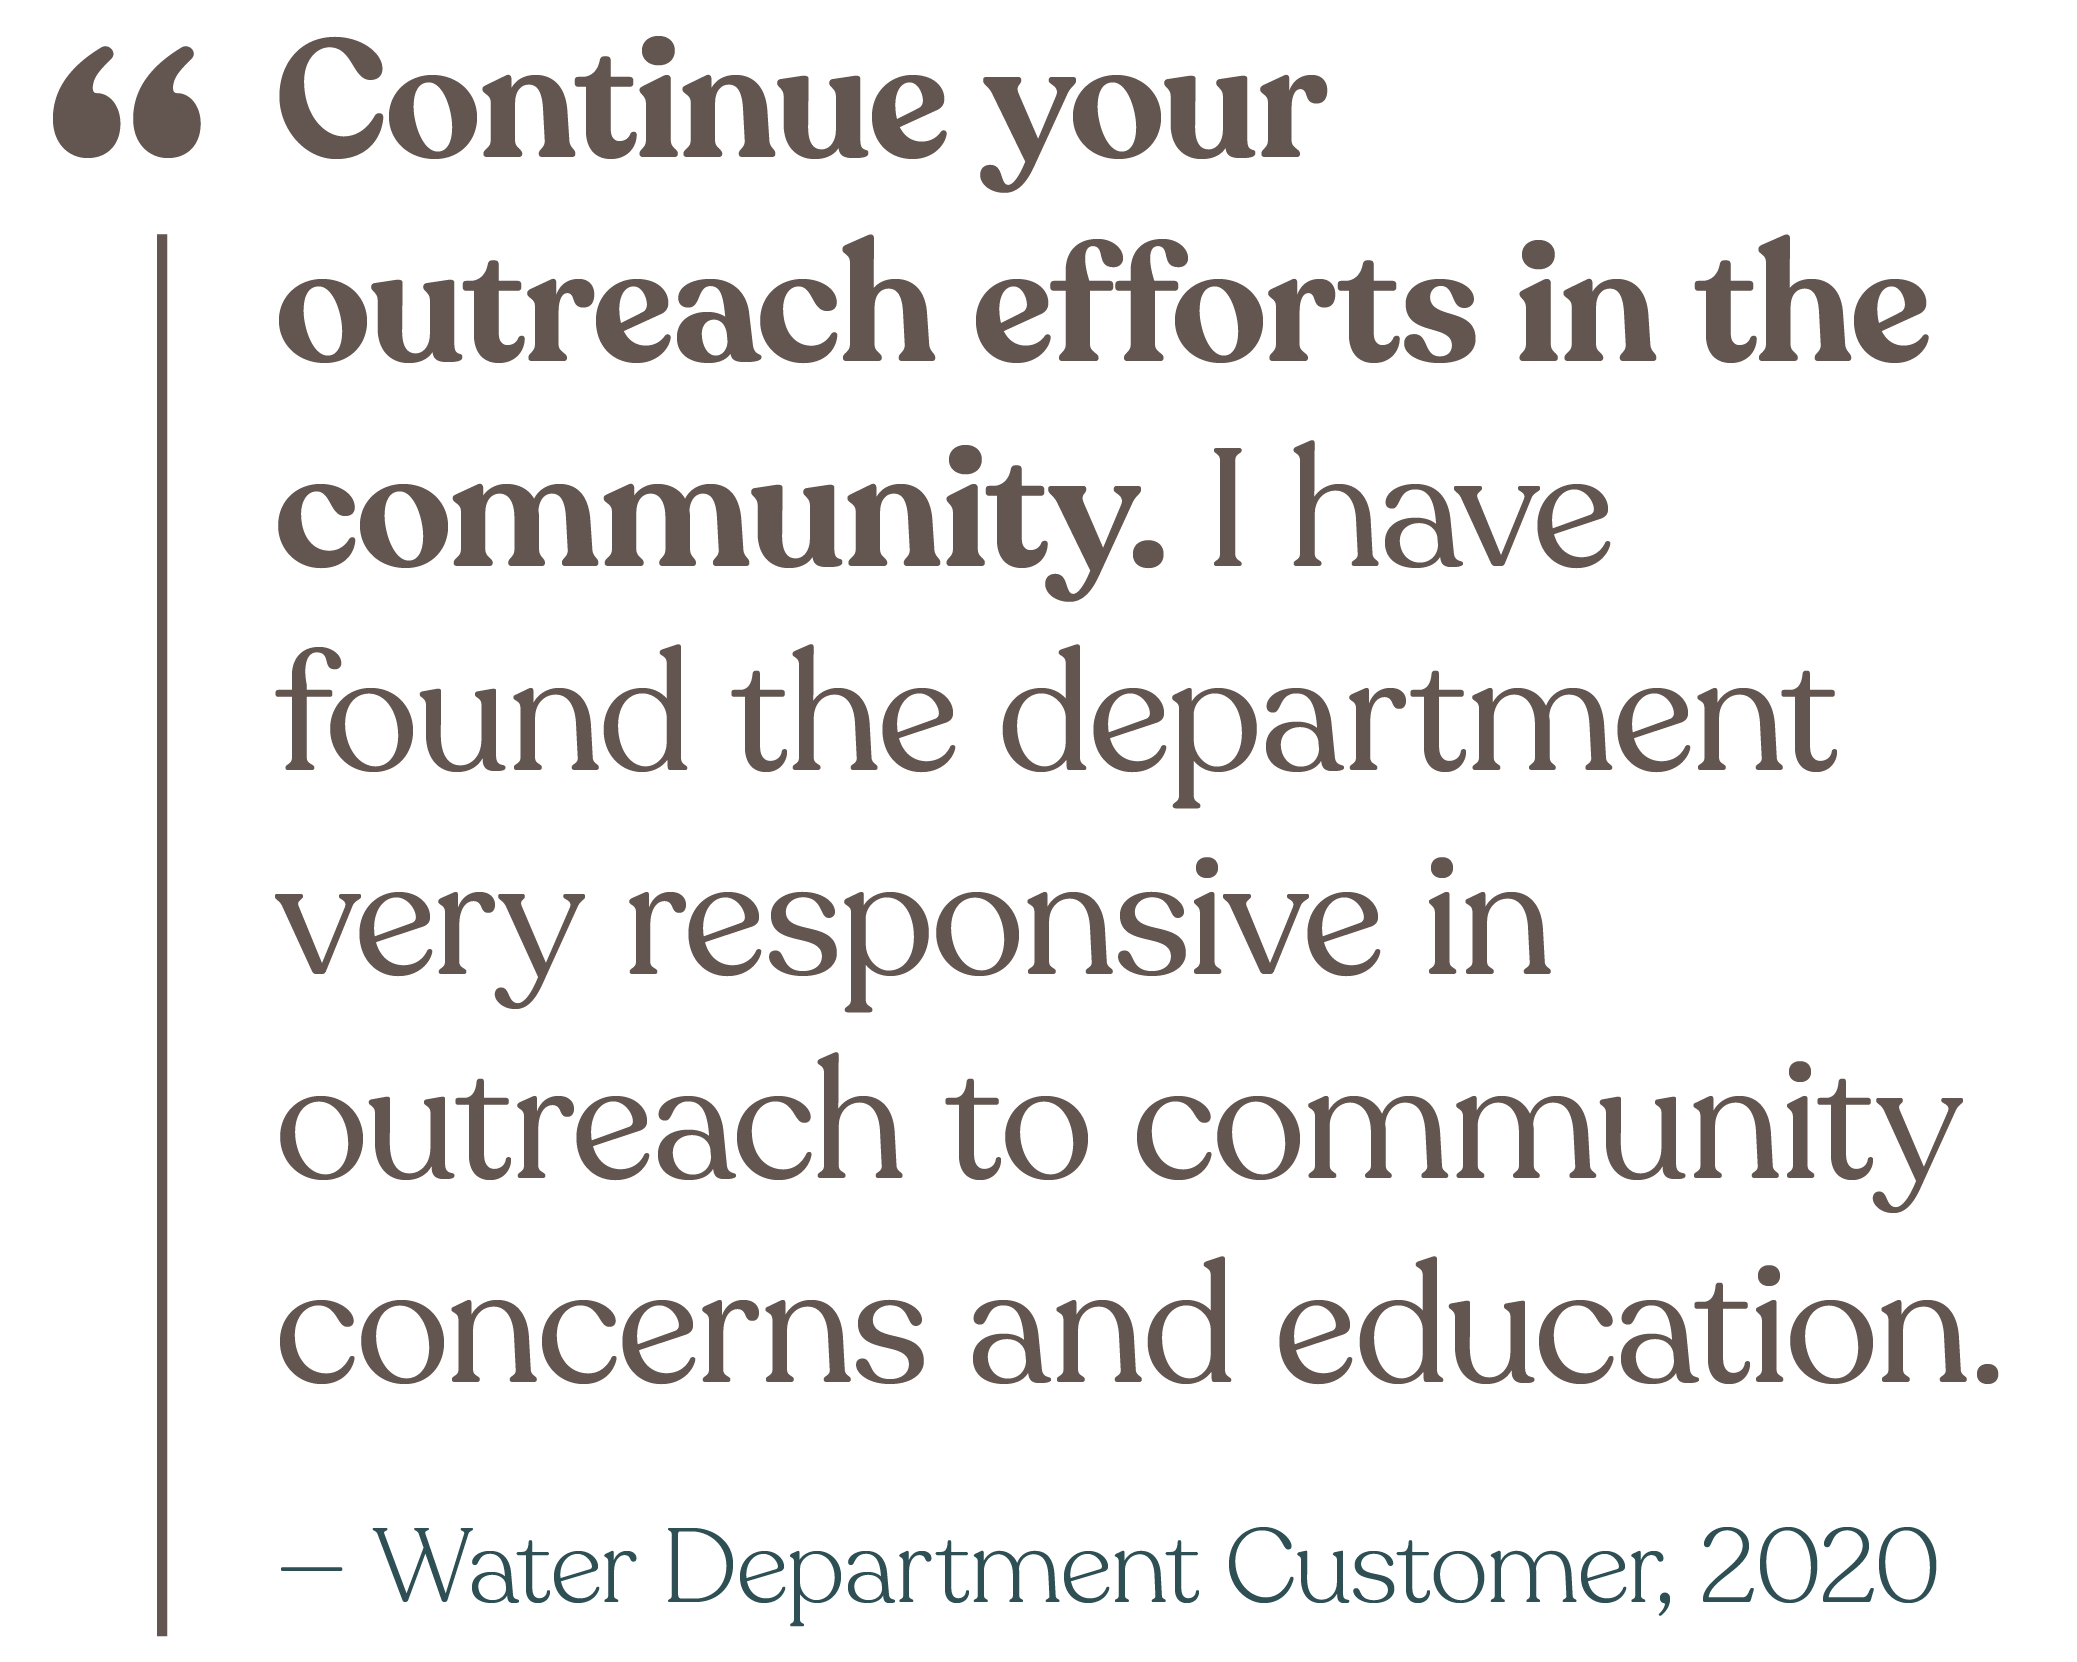 Continue your outreach efforts in the community. I have found the department very responsive in outreach to community concerns and education. (from a Water Department Customer in 2020)